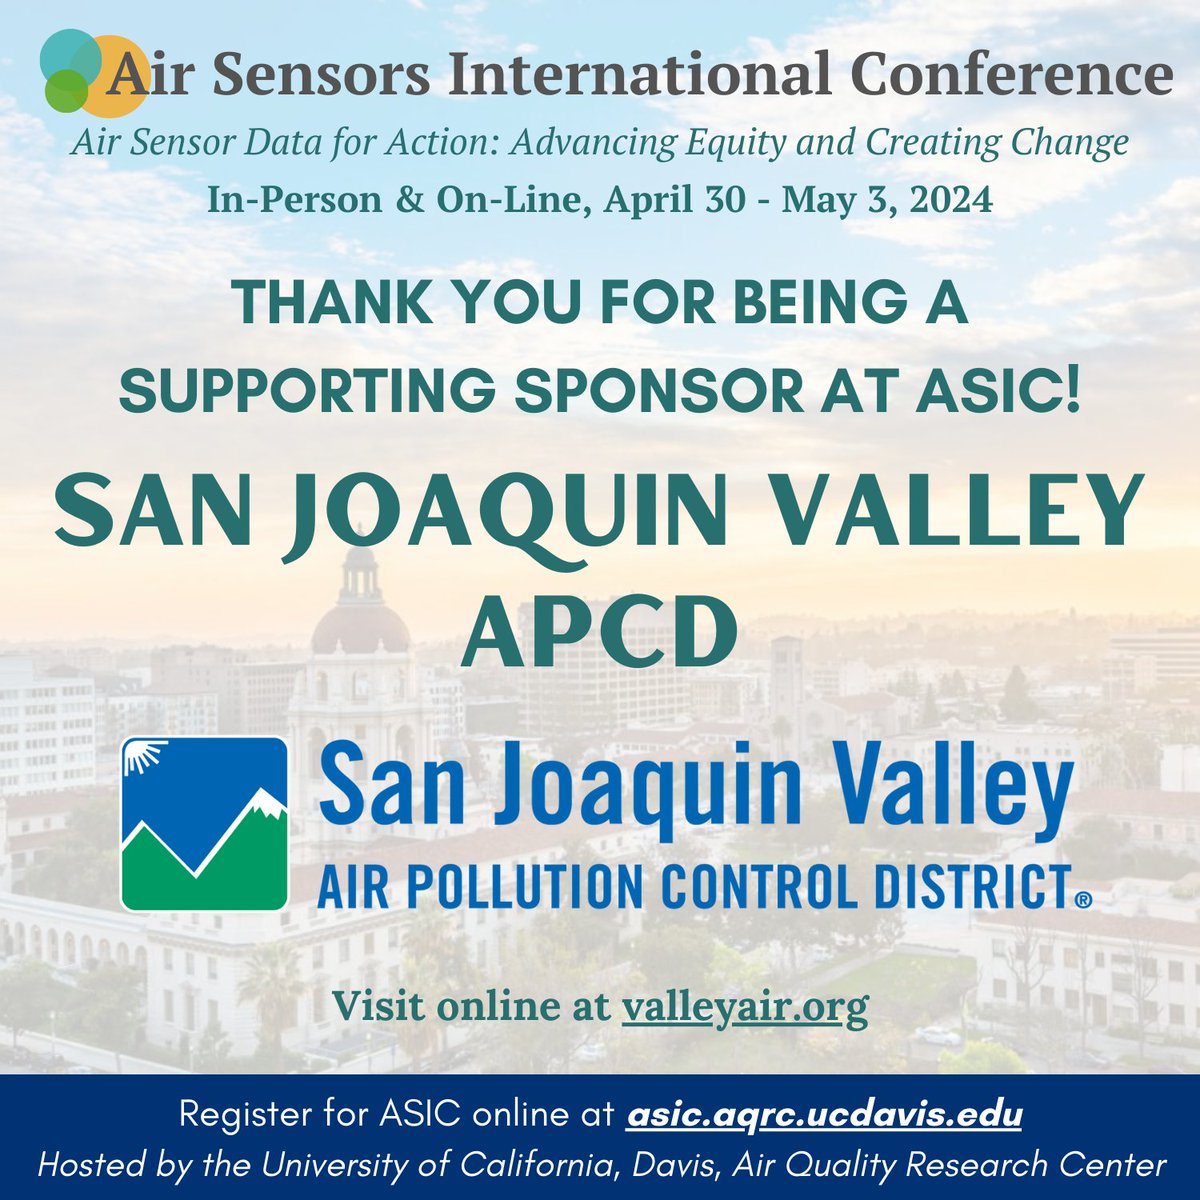 Thank you to the San Joaquin Valley Air Pollution Control District for being a supporting sponsor at ASIC California 2024! Learn more about them at valleyair.org/Home.htm. @ValleyAir #ASIC2024 #airquality #airsensors #lowcostsensors #airpollution #california #centralvalley